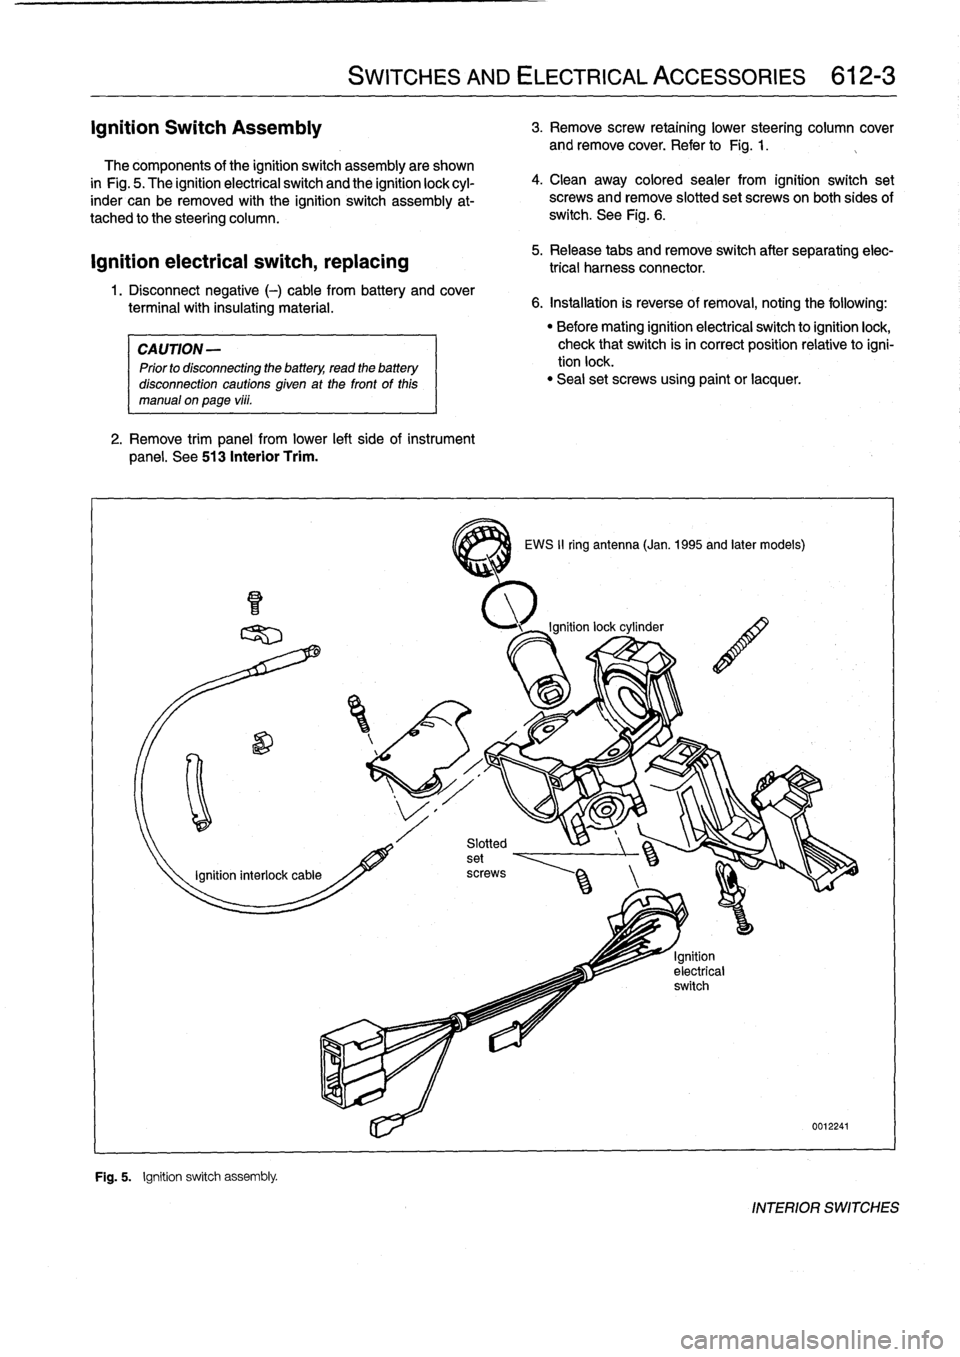 BMW 323i 1993 E36 Manual PDF 
Ignition
Switch
ASsembly

	

3
.
Remove
screw
retaining
lower
steering
column
cover
and
remove
cover
.
Refer
to
Fig
.
1
.

	

,

The
components
of
the
ignition
switch
assembly
are
shown

in
Fig
.
5
.